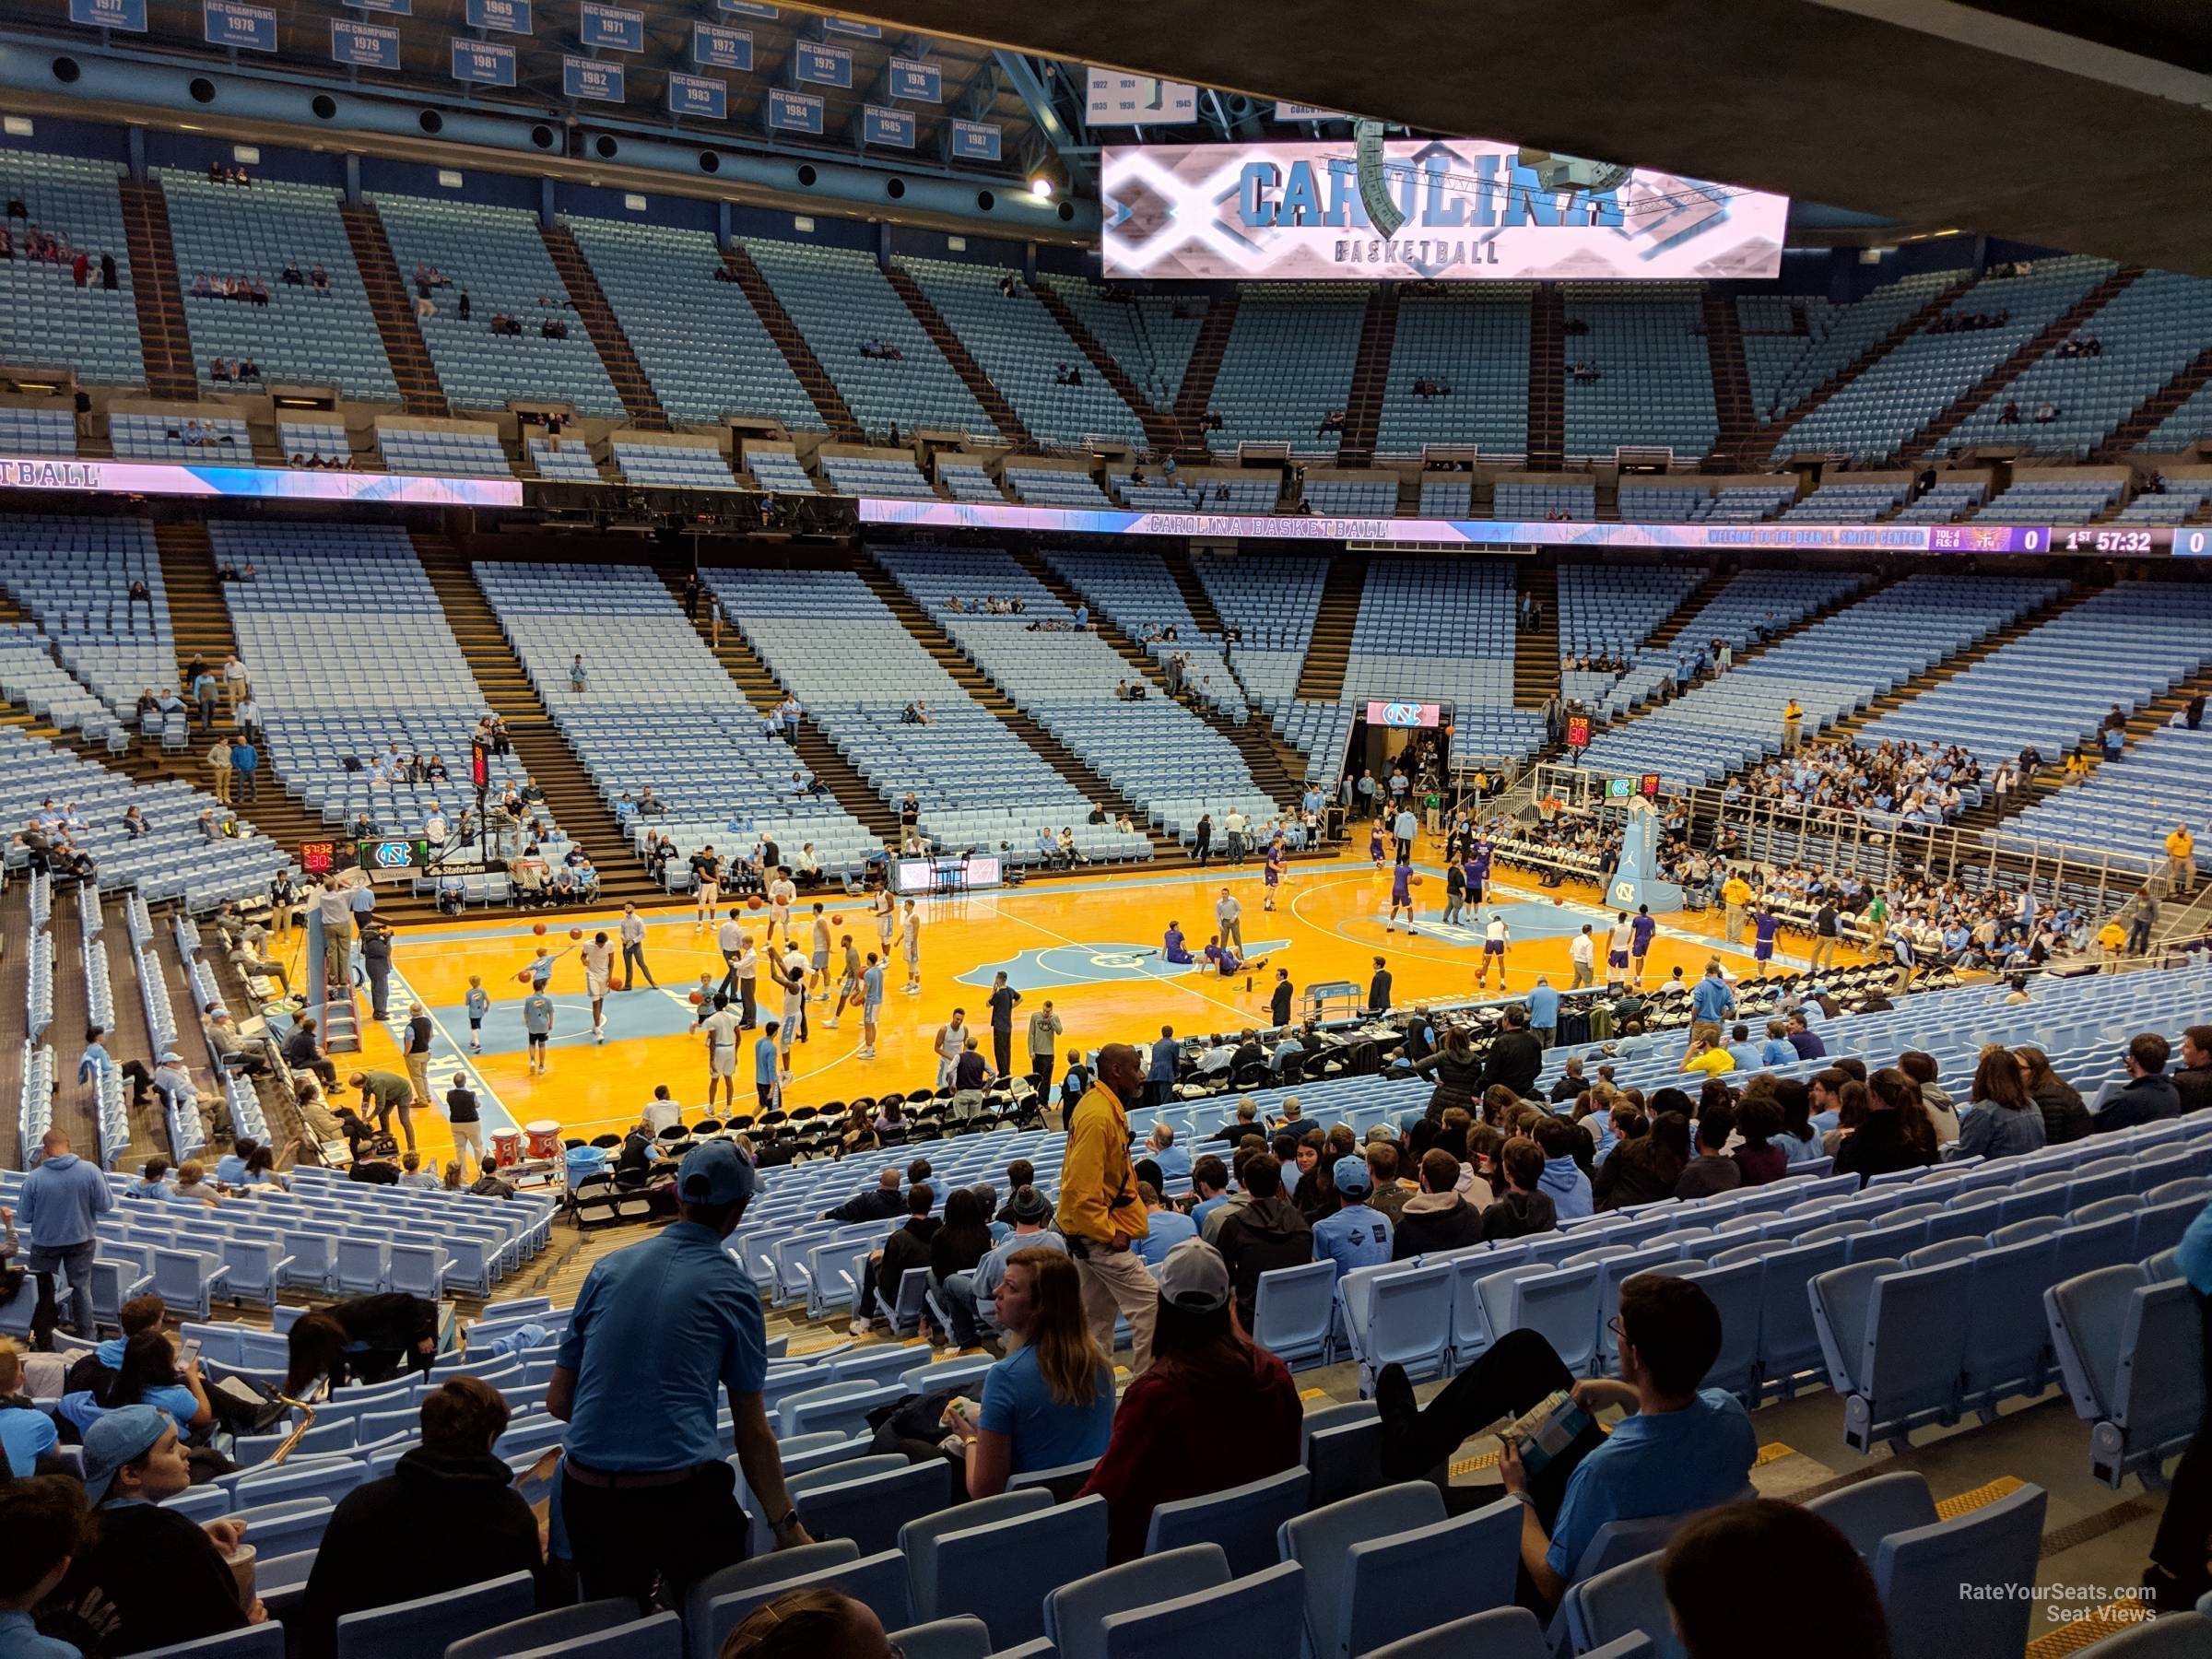 section 106, row z seat view  - dean smith center